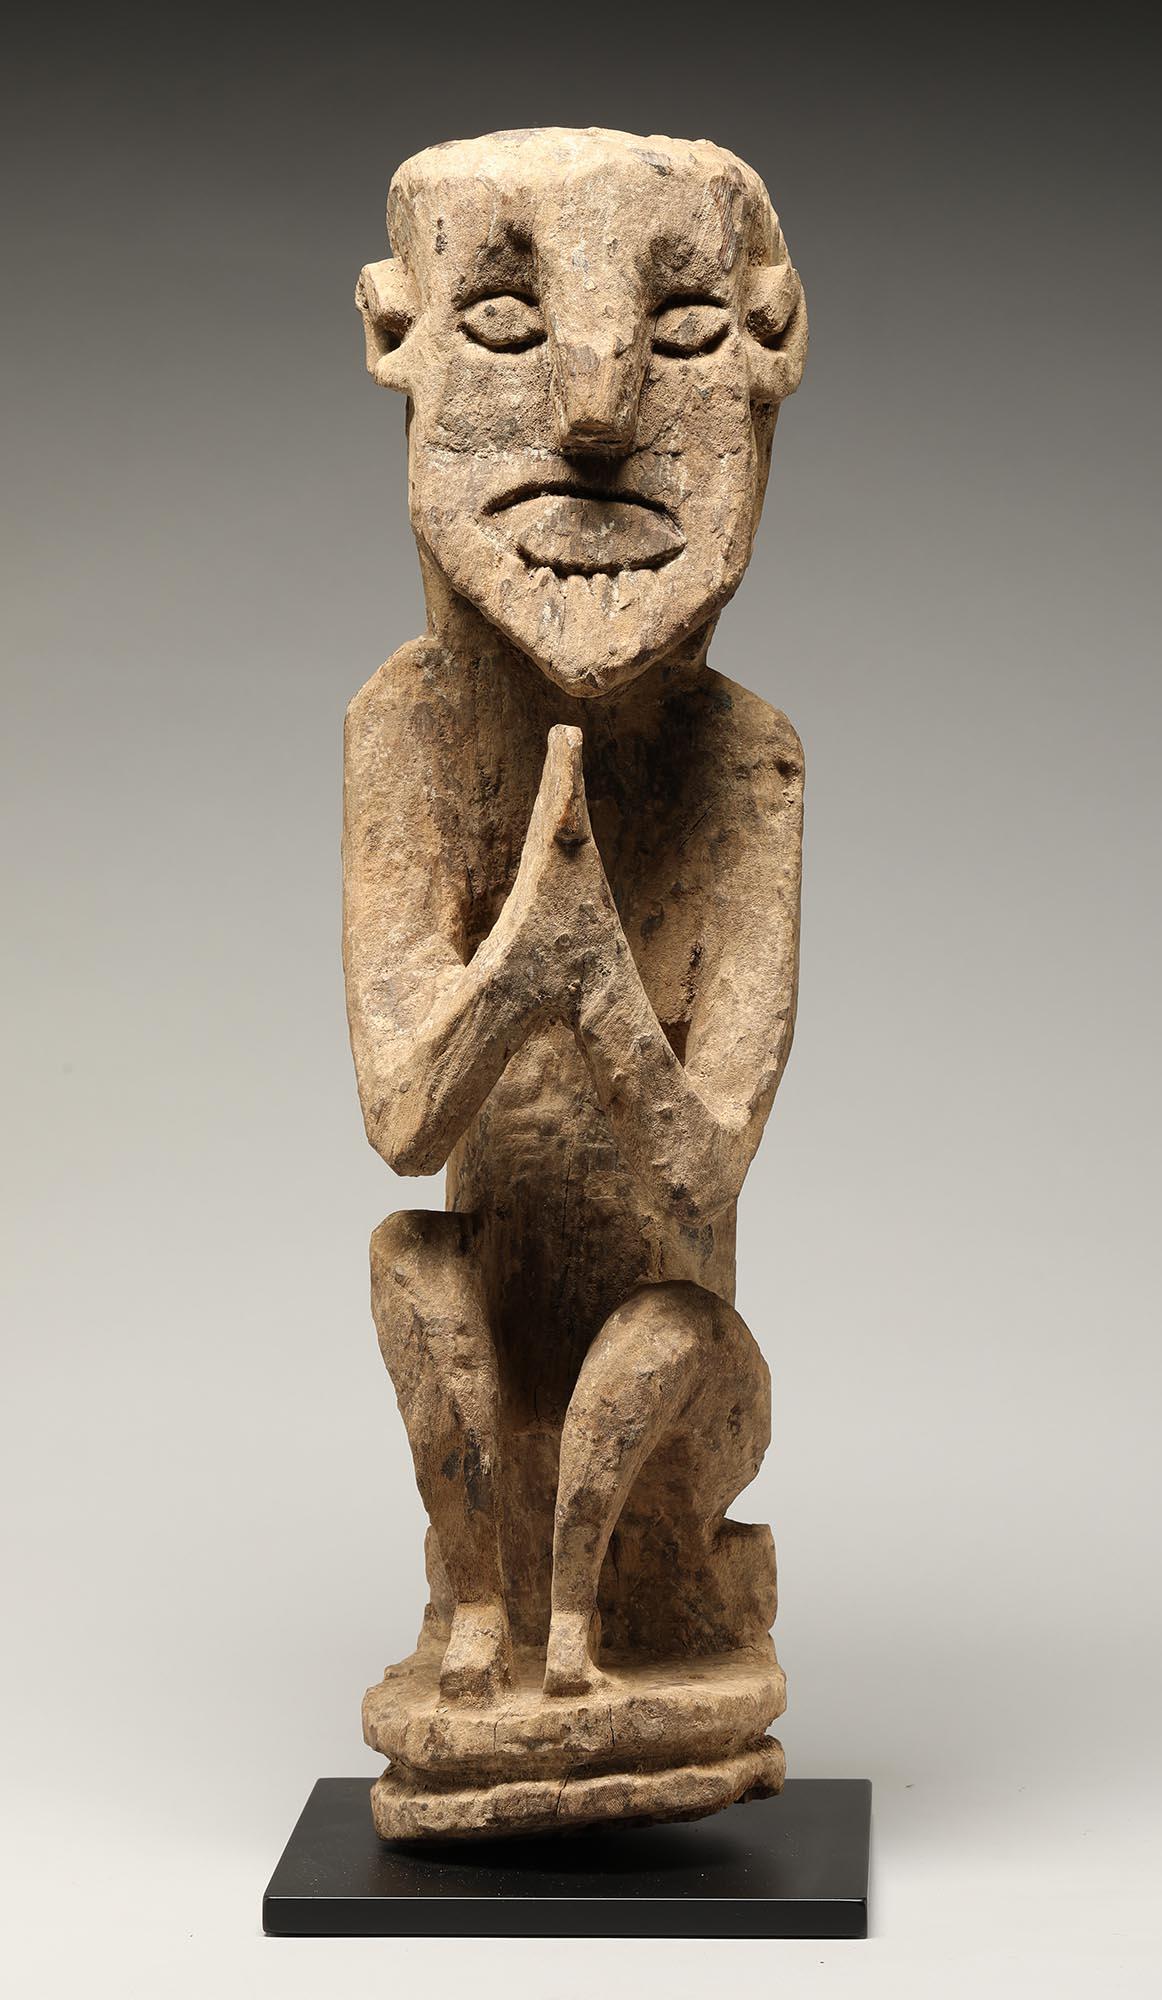 Old weathered tribal squatting spring figure with hands raised in namaste position, traces of clay and incrustation, expressive carved open mouth and eyes. These were protective figures used in Nepal. Late 19th to early 20th century, 17 inches high.